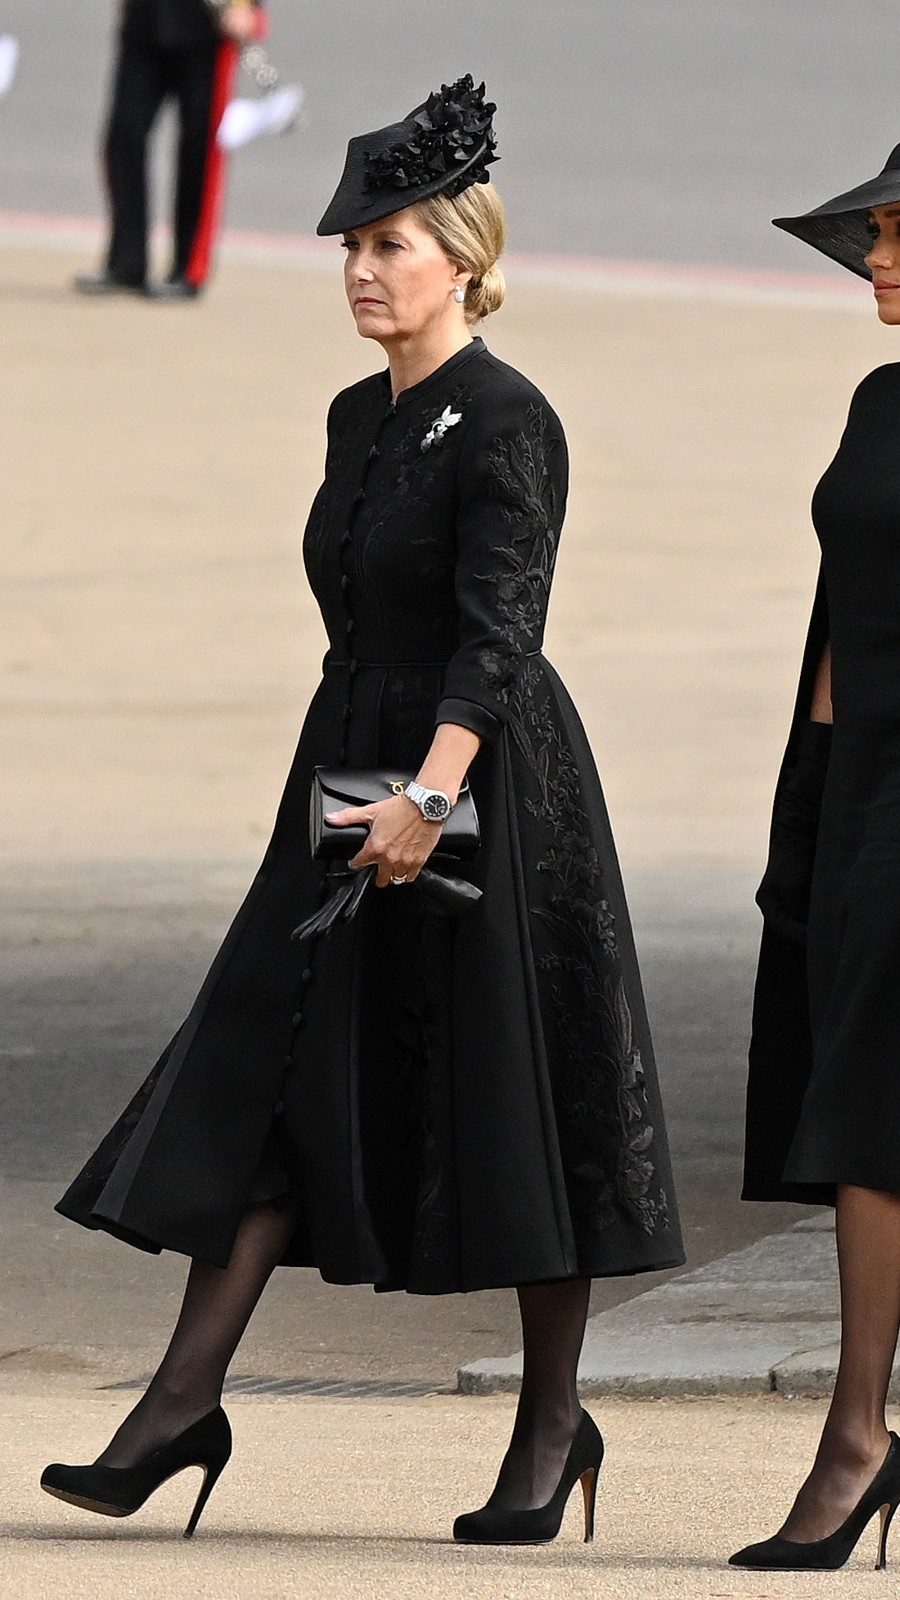 Sophie Wessex's outfit paid subtle tribute to The Queen | Woman & Home